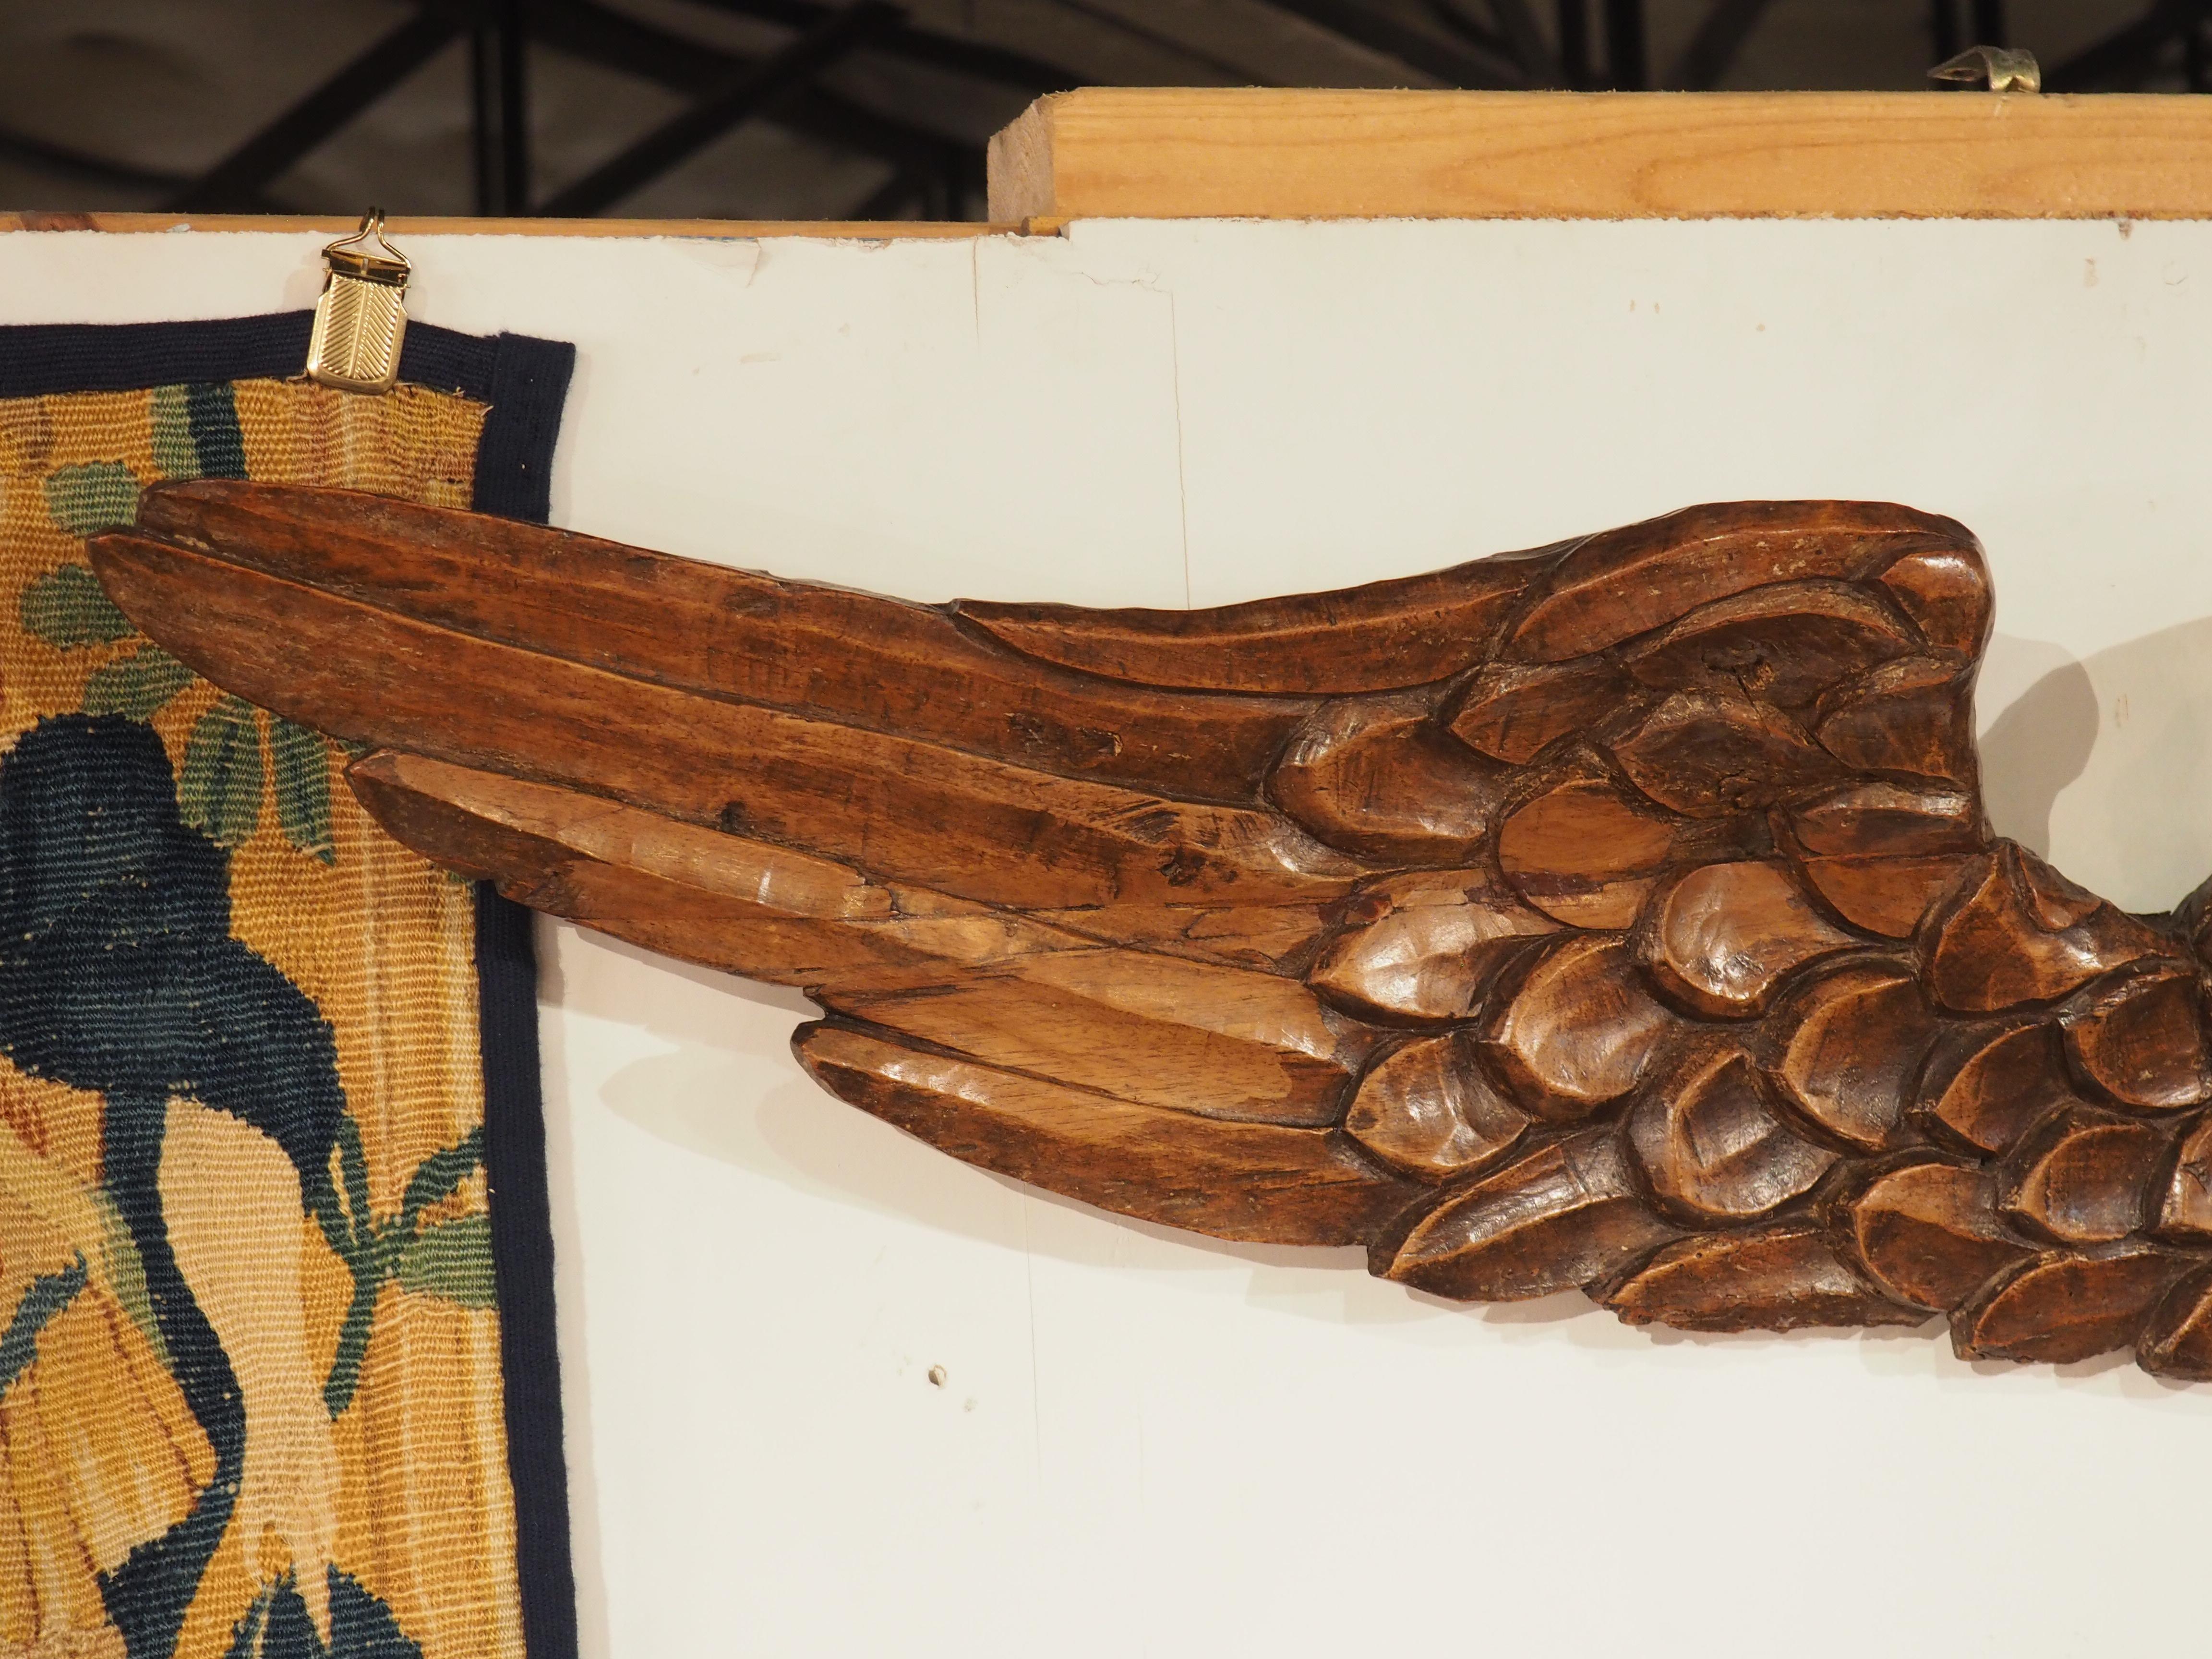 At over four feet wide, this winged angel carving has an impressive span. Hand-carved in walnut in France during the 1600’s, the sculpture depicts the innocent face of an angel with wings extended to the sides. The woodworker had an amazing eye for